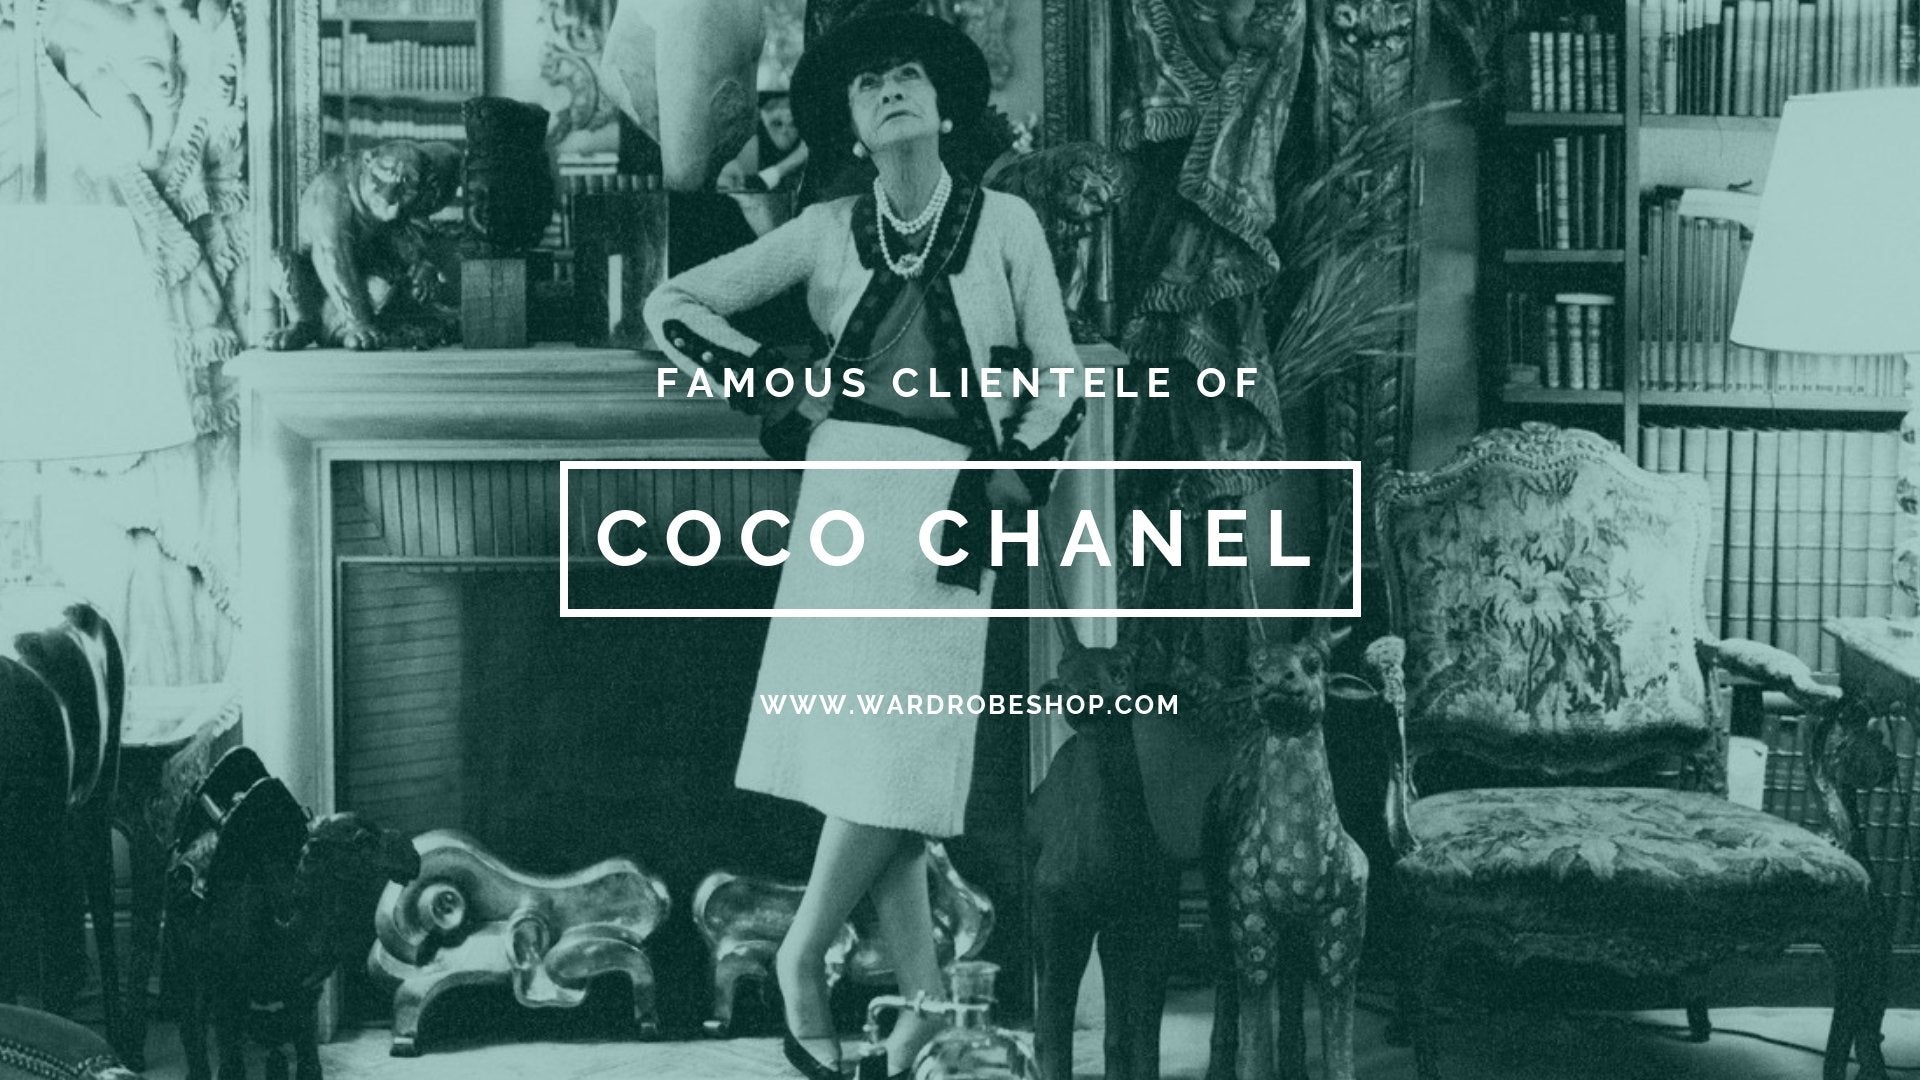 Iconic Coco Chanel and Model from the 1940s